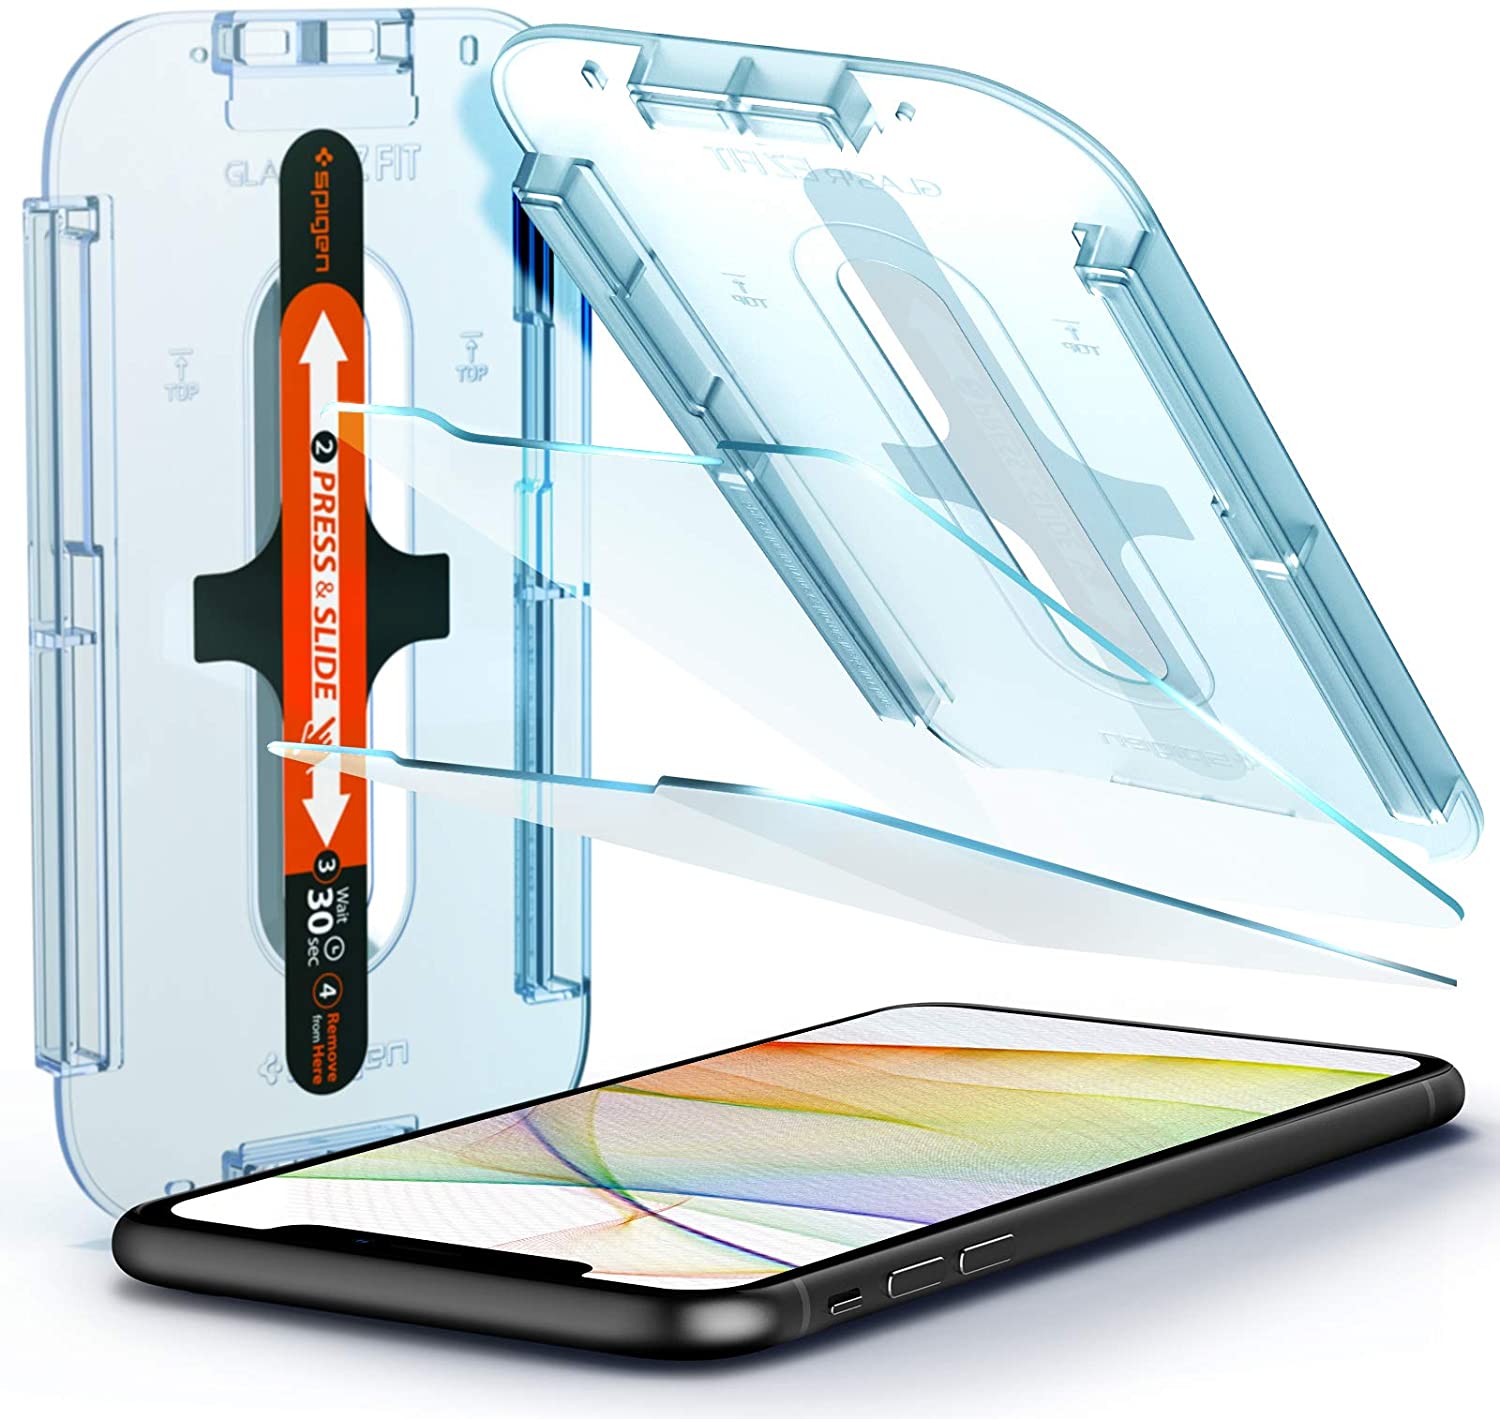 Spigen Tempered Glass Screen Protector [Glas.tR EZ Fit] designed for  iPhone 11 Pro Max/iPhone Xs Max [Case Friendly] - 2 Pack - e4cents